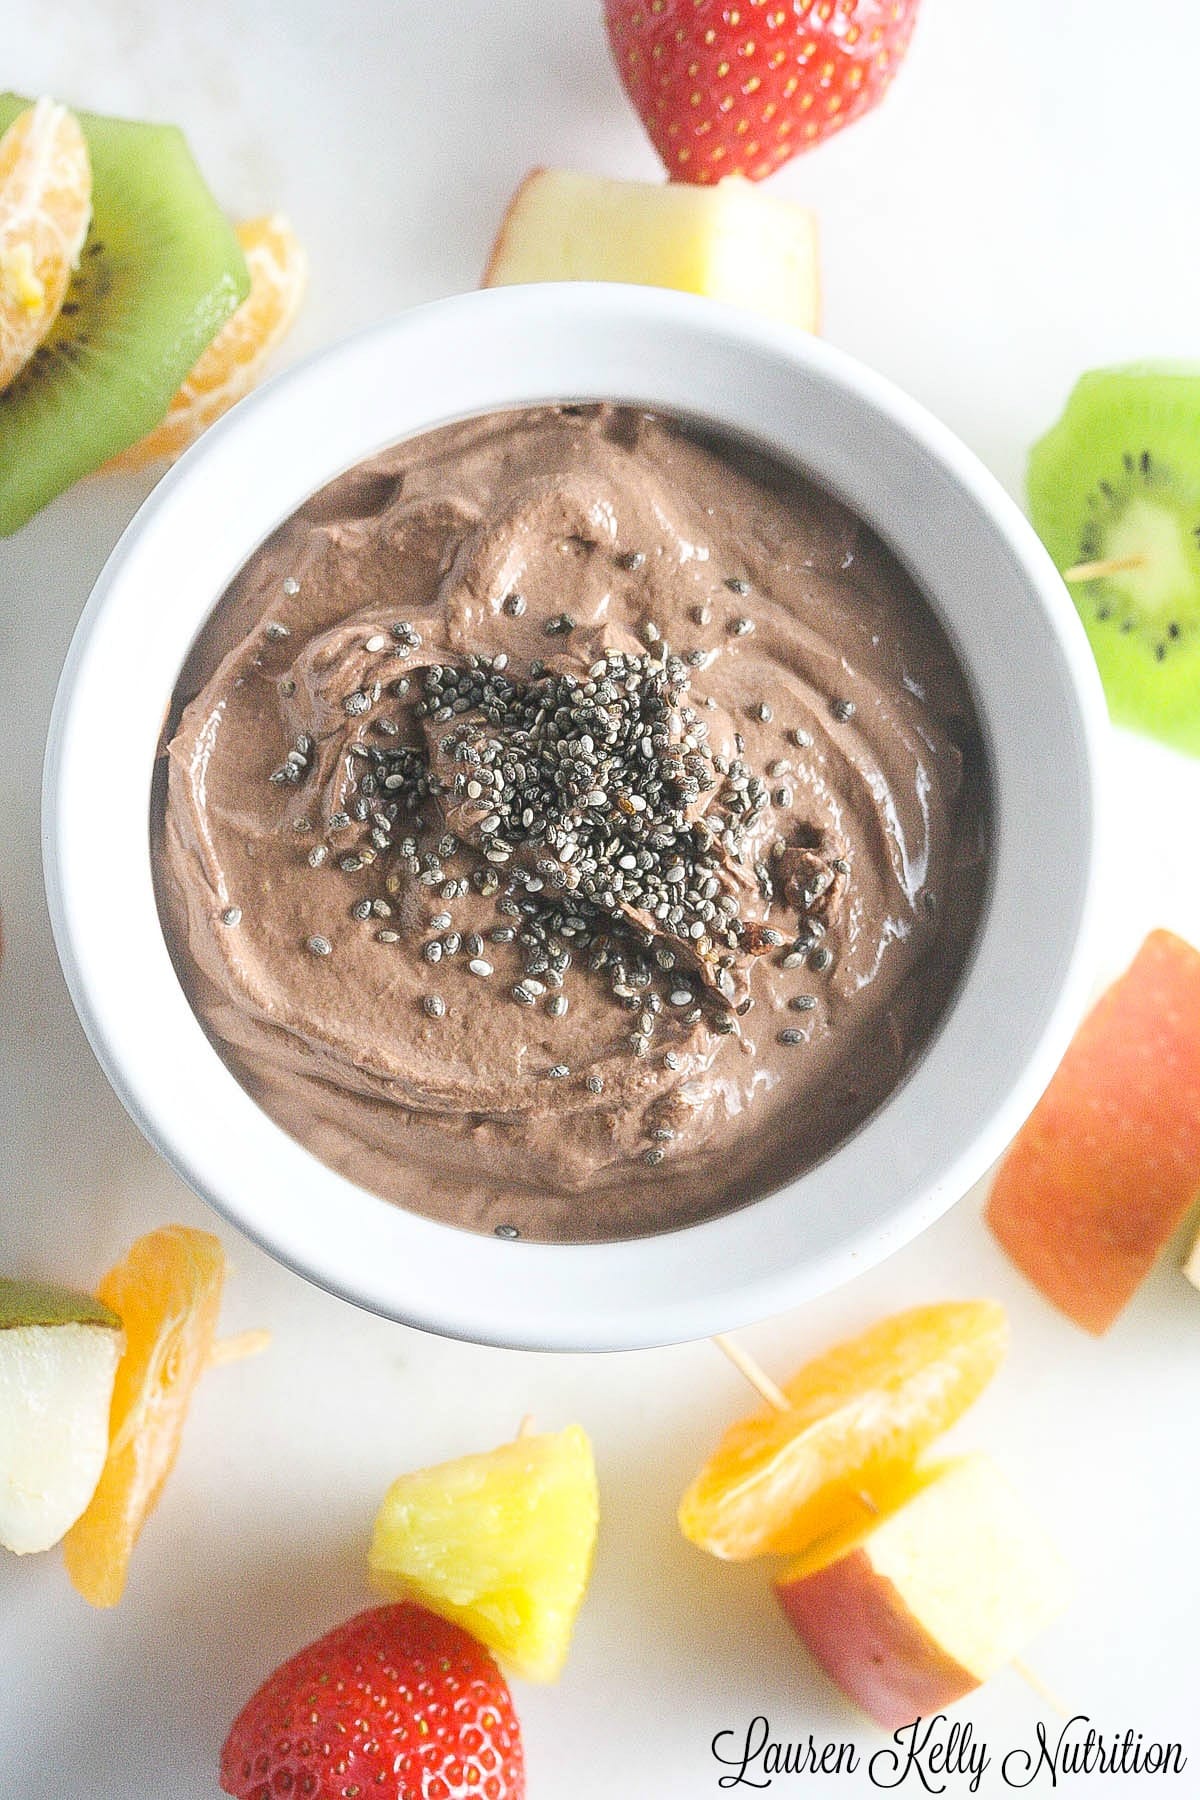 This Chocolate Peanut Butter Dip is packed with protein, antioxidants and fiber and taste DELICIOUS! www.laurenkellynutrition.com